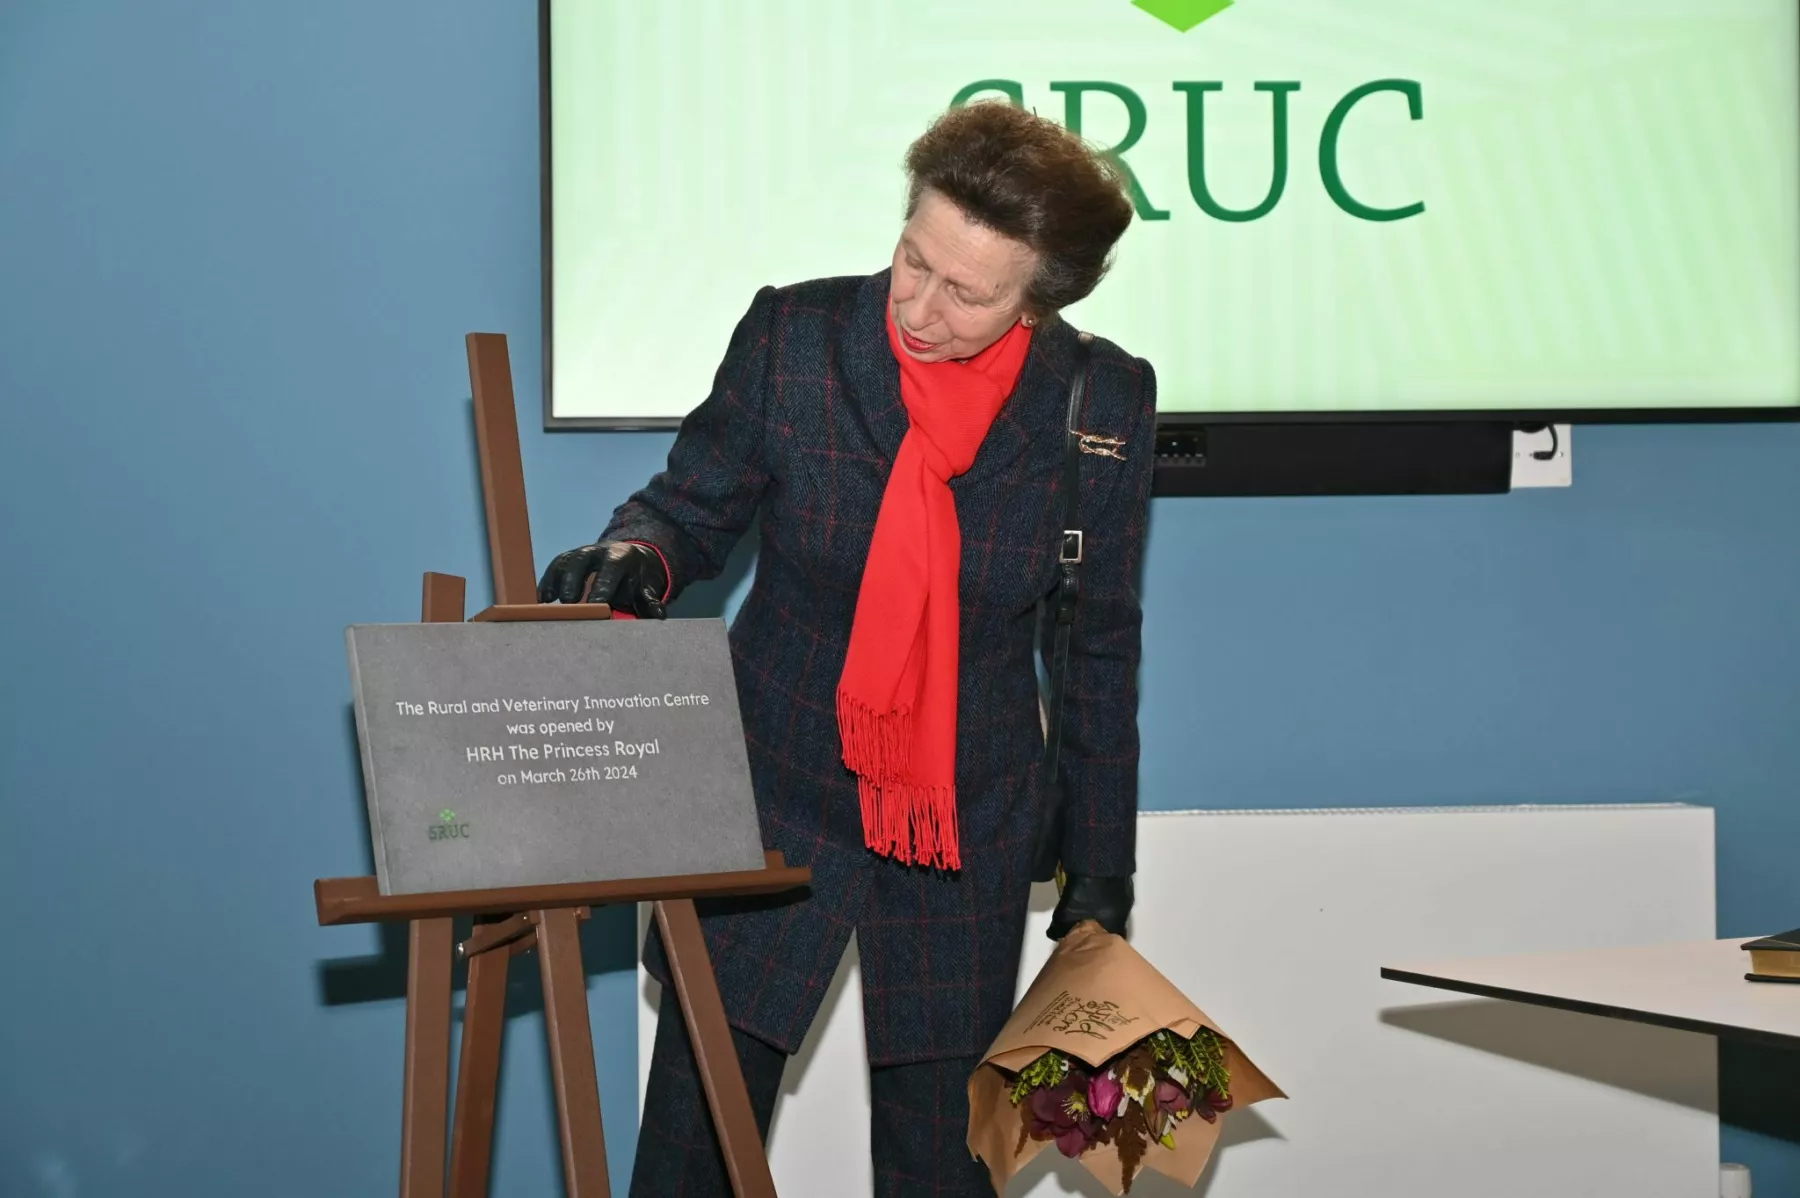 Photograph of HRH The Princess Royal opening the new Innovation Centre standing next to plaque.